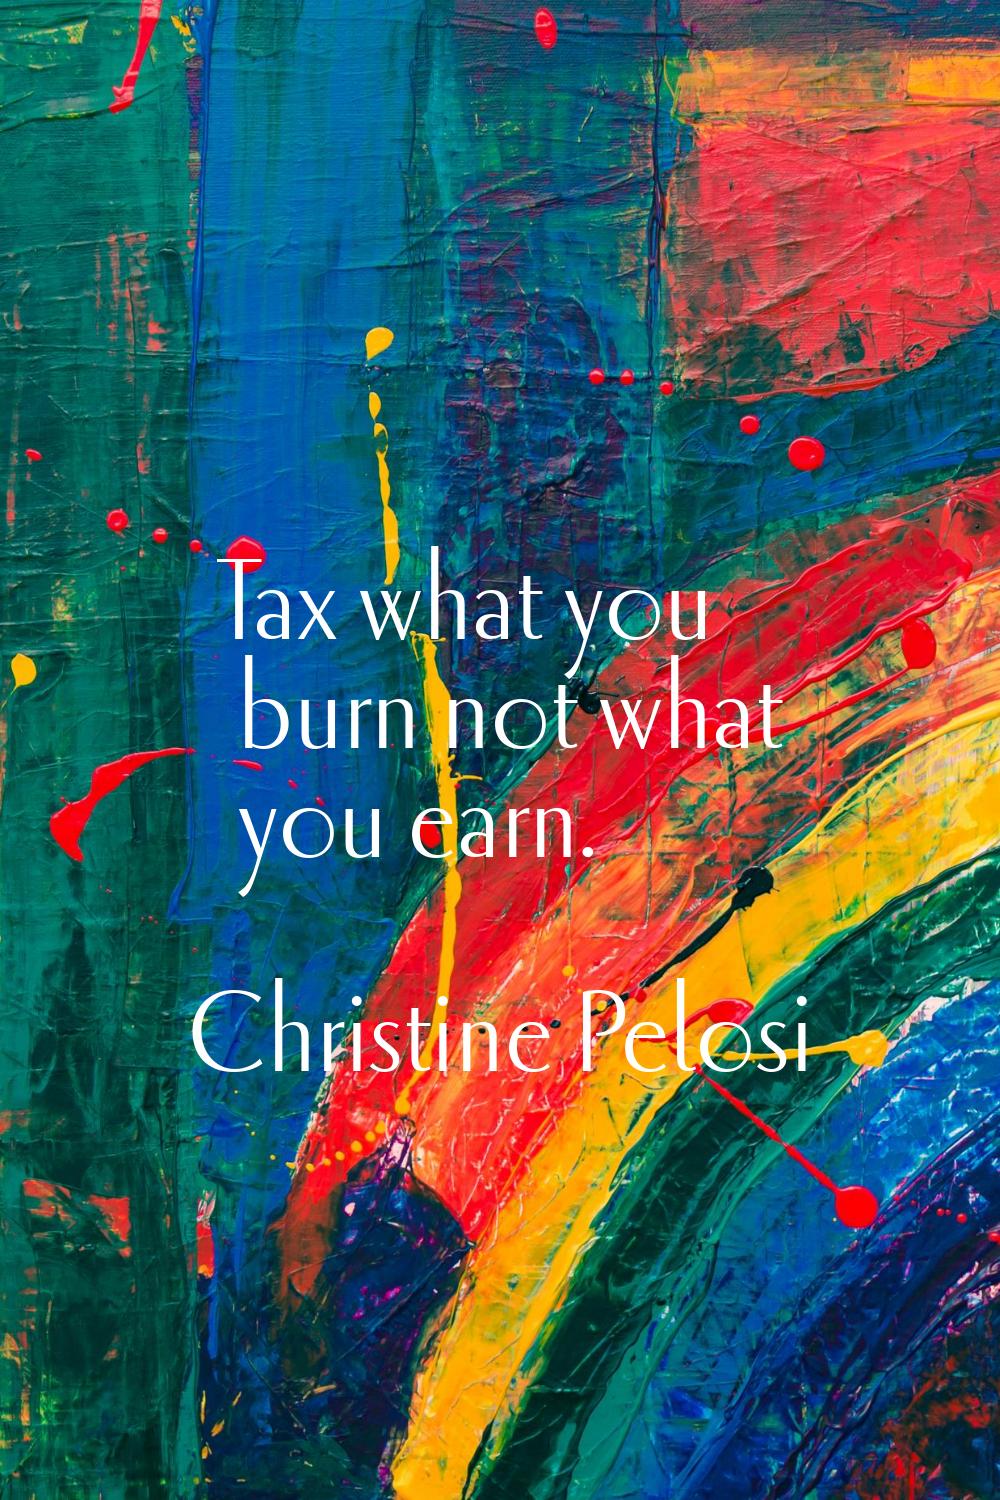 Tax what you burn not what you earn.